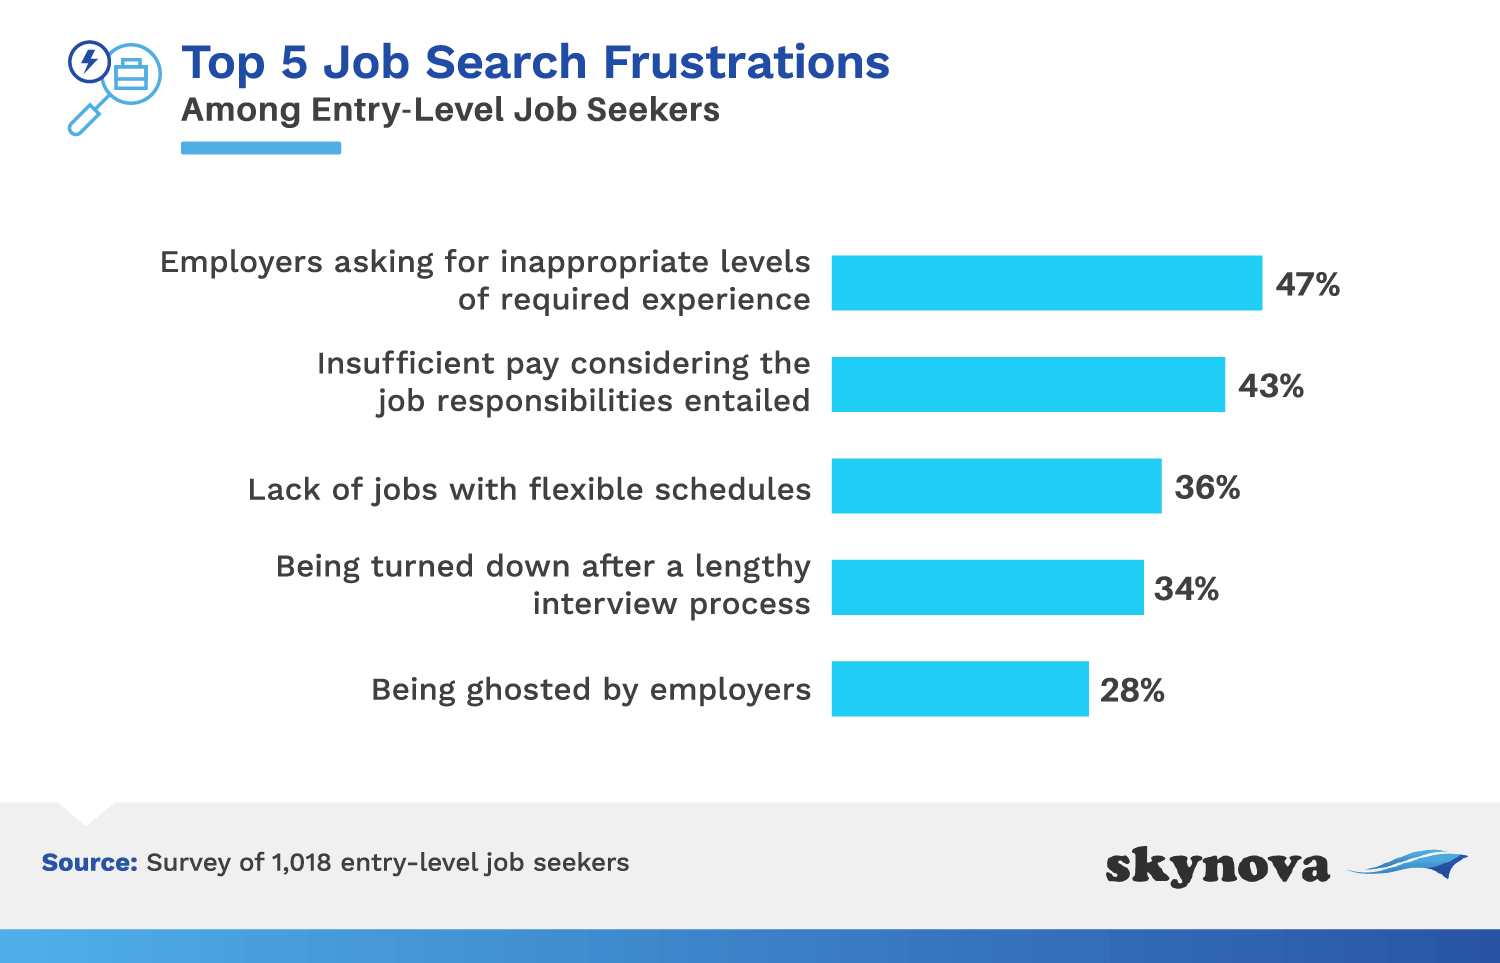 Top job search frustrations among entry-level job seekers